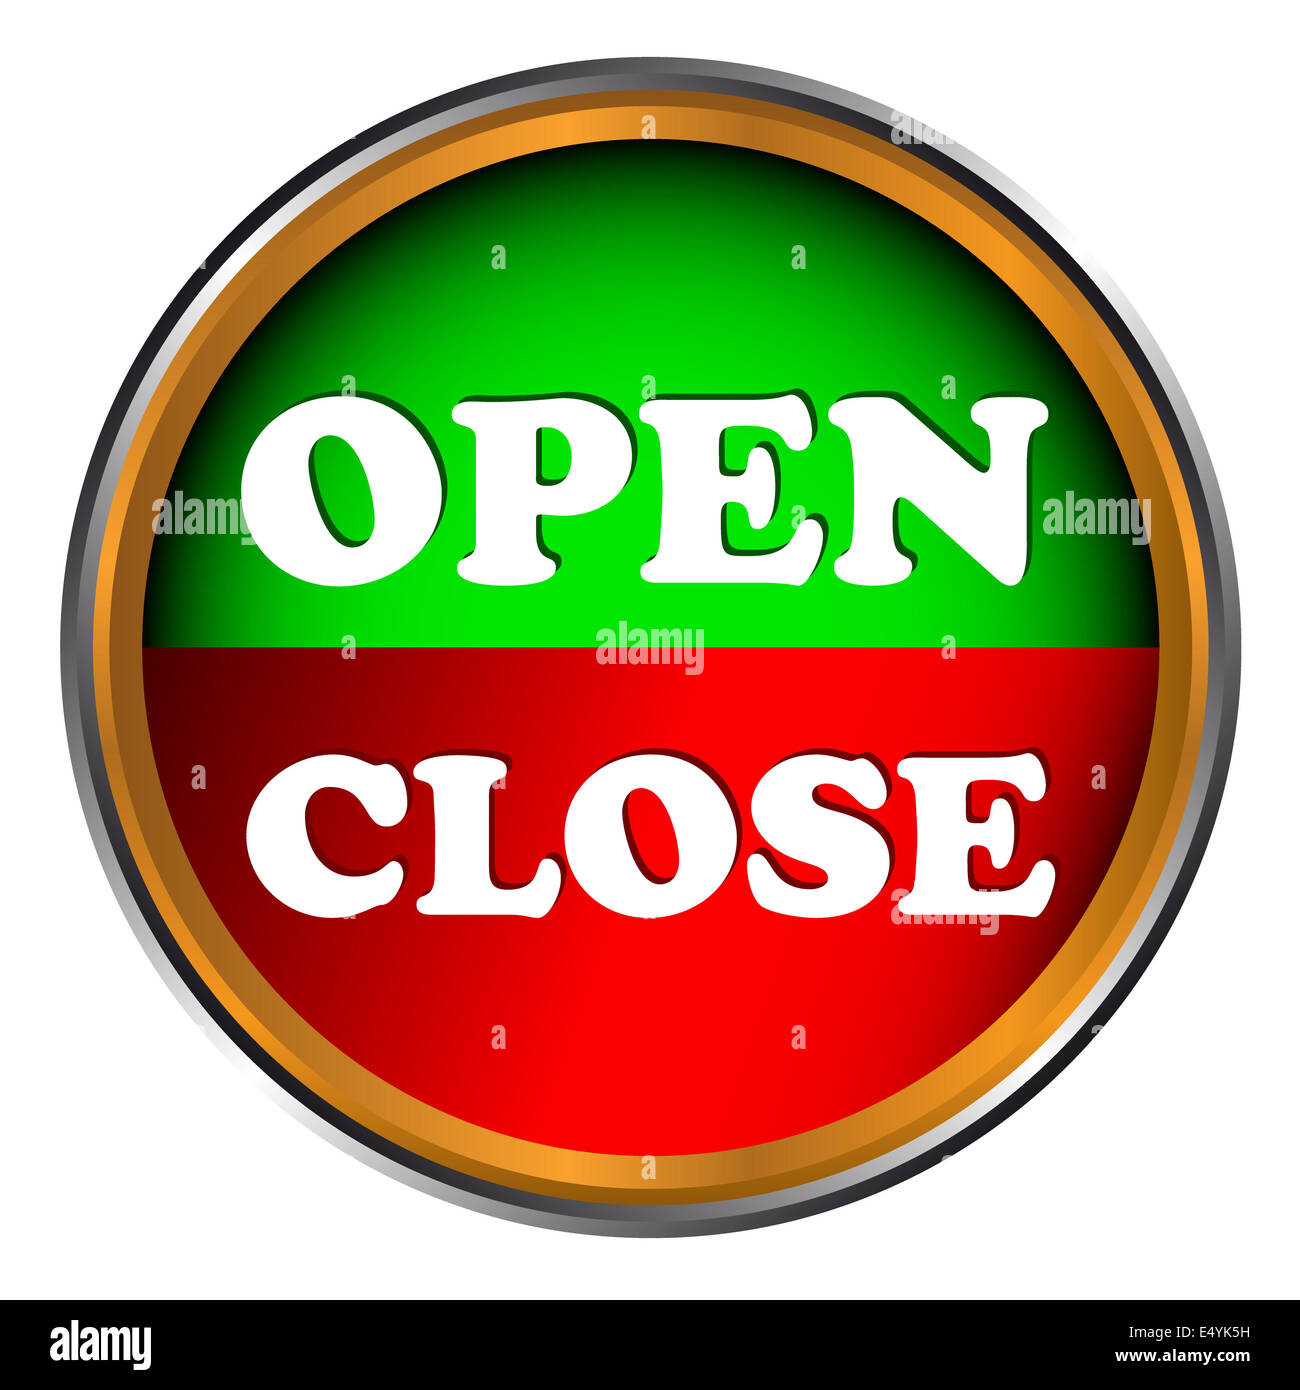 Open and close icon Stock Photo